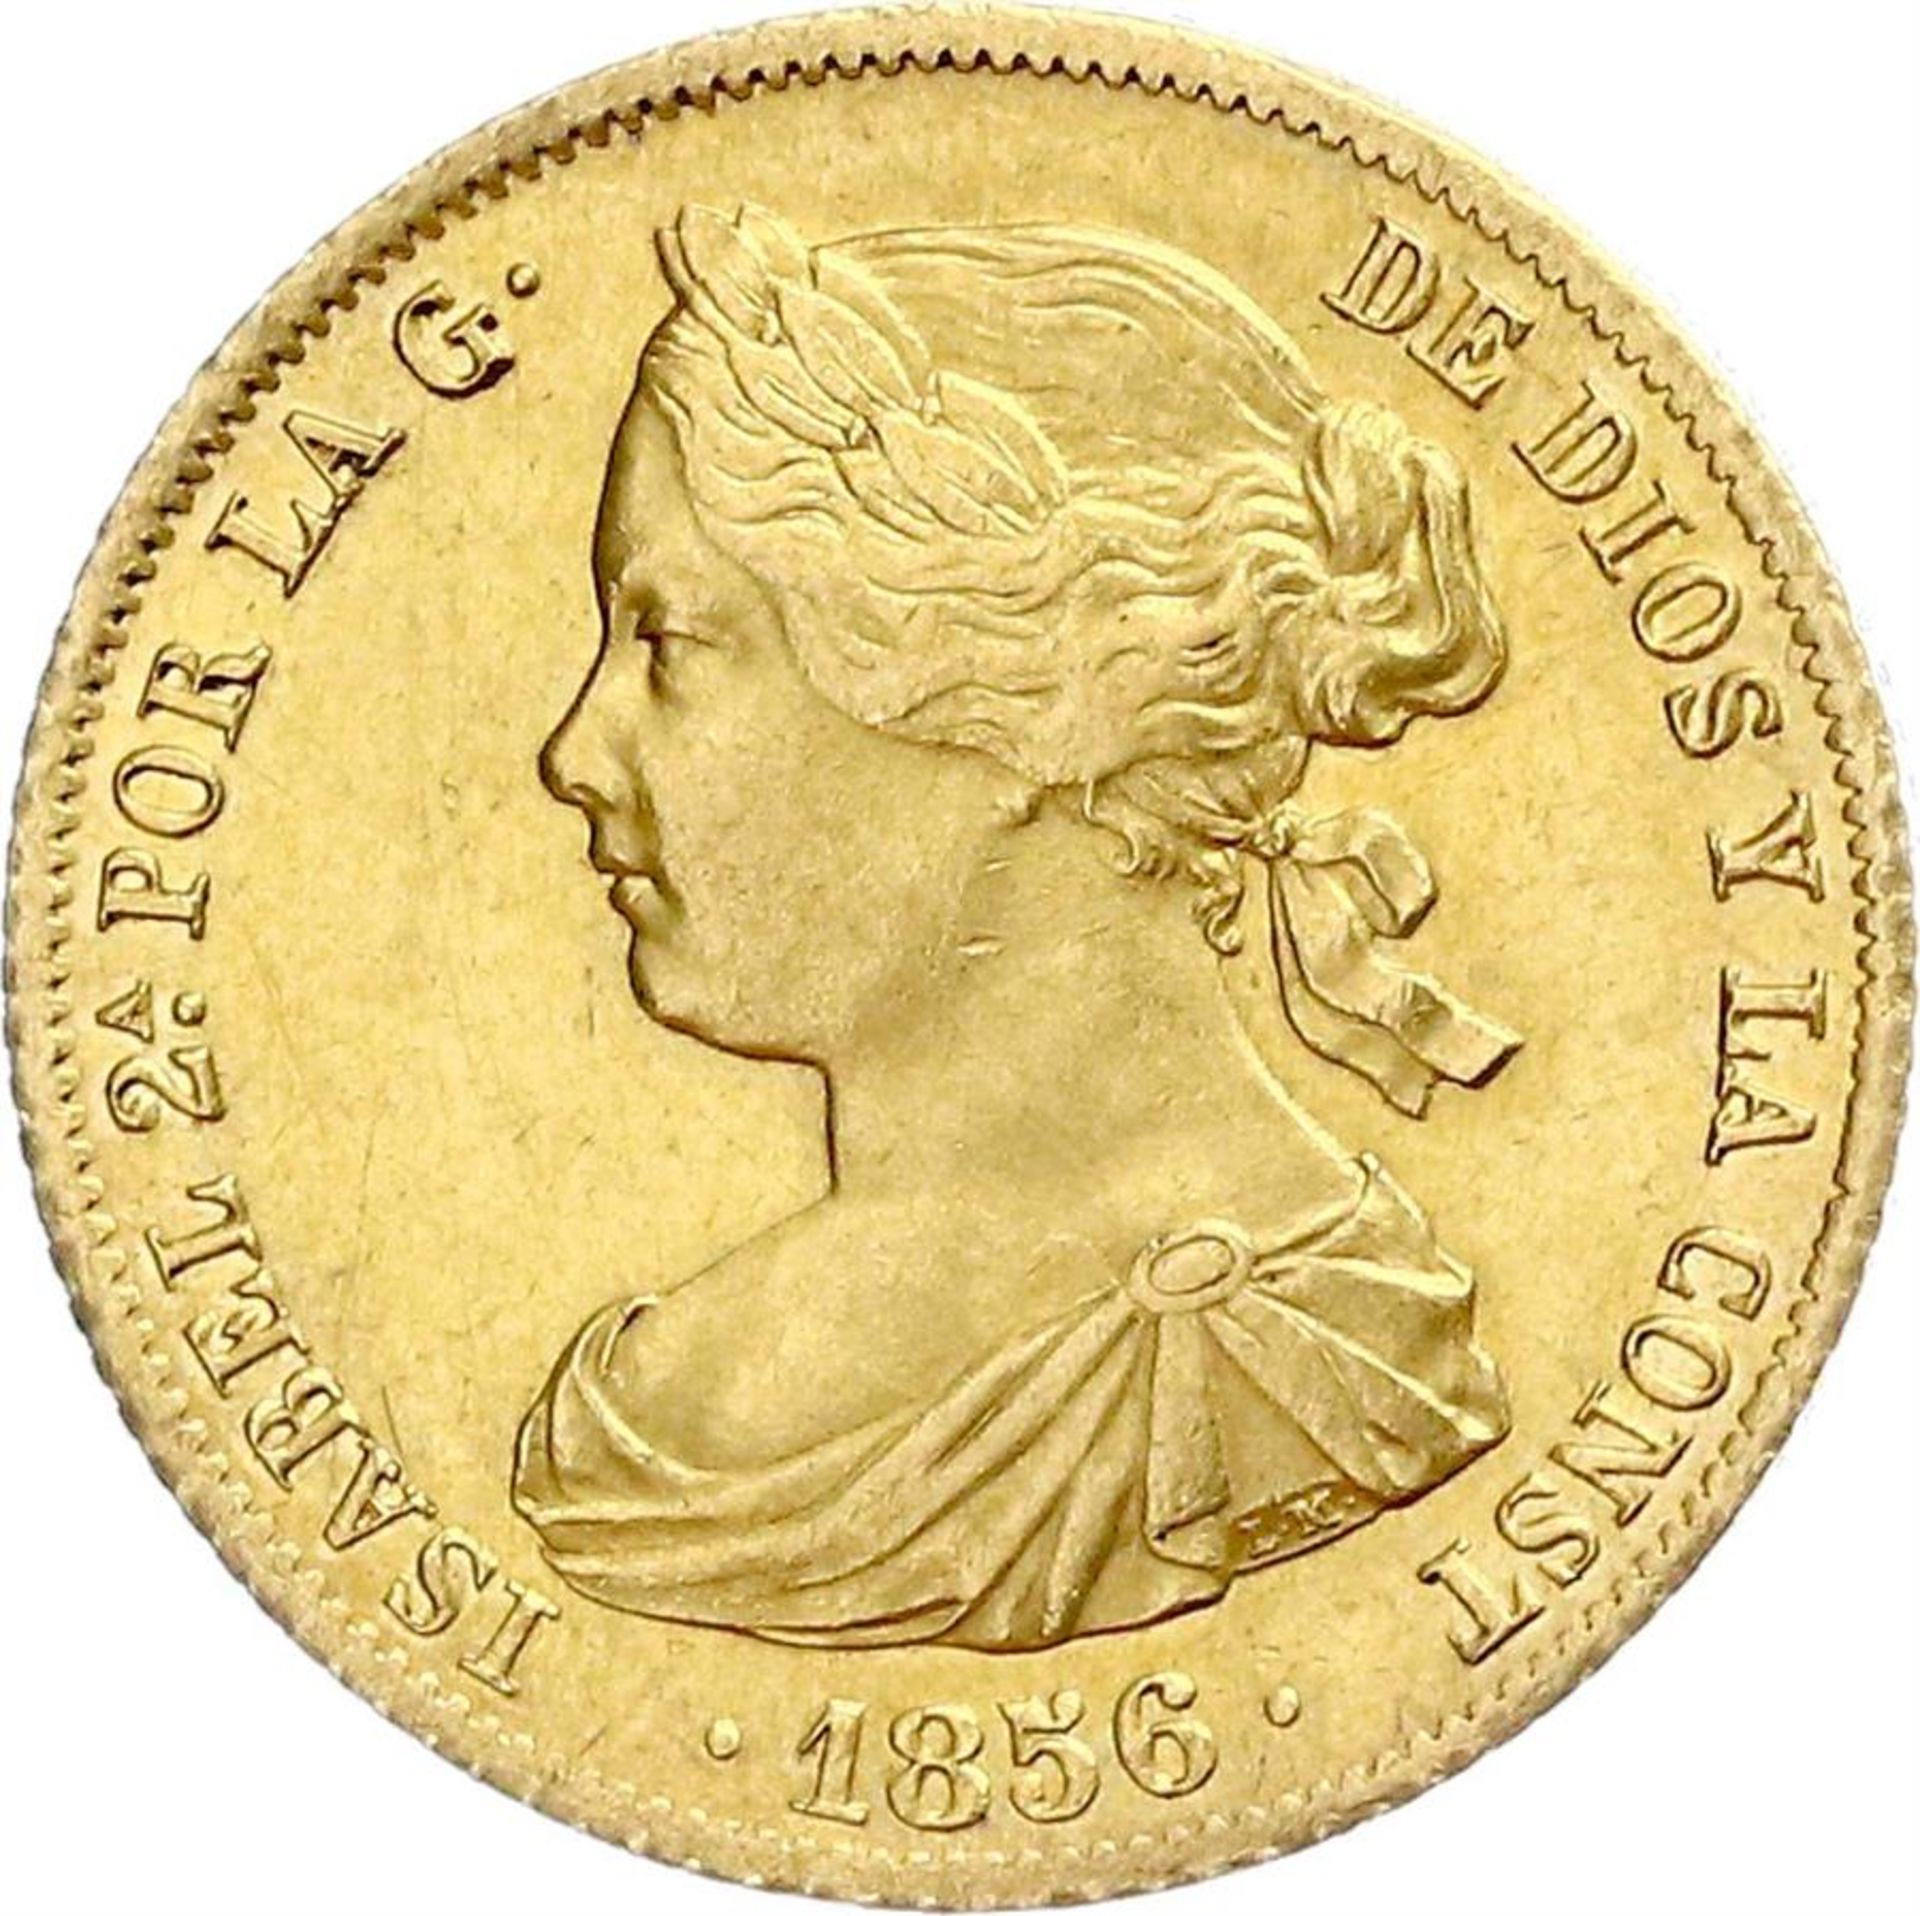 Isabel II 1856 - 100 Reales, Gold Coin - Rare. - Image 2 of 3